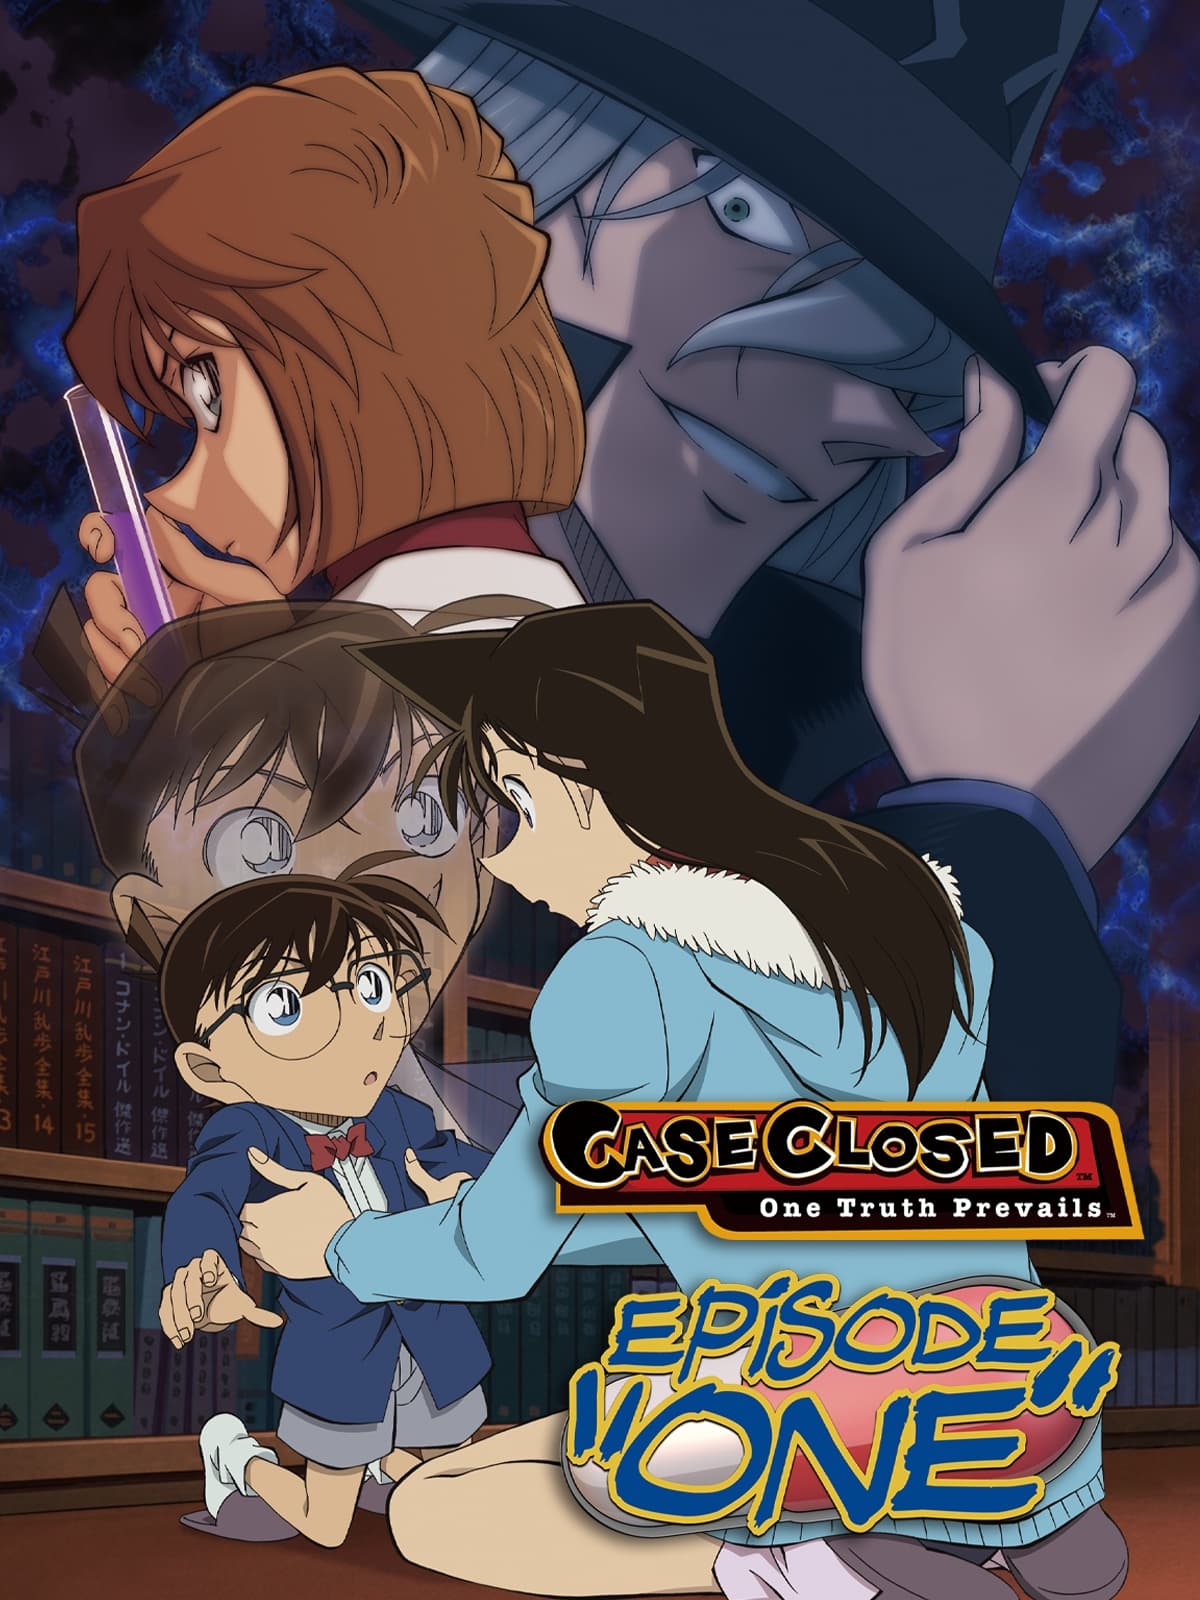 Detective Conan: Episode One - The Great Detective Turned Small (2017)